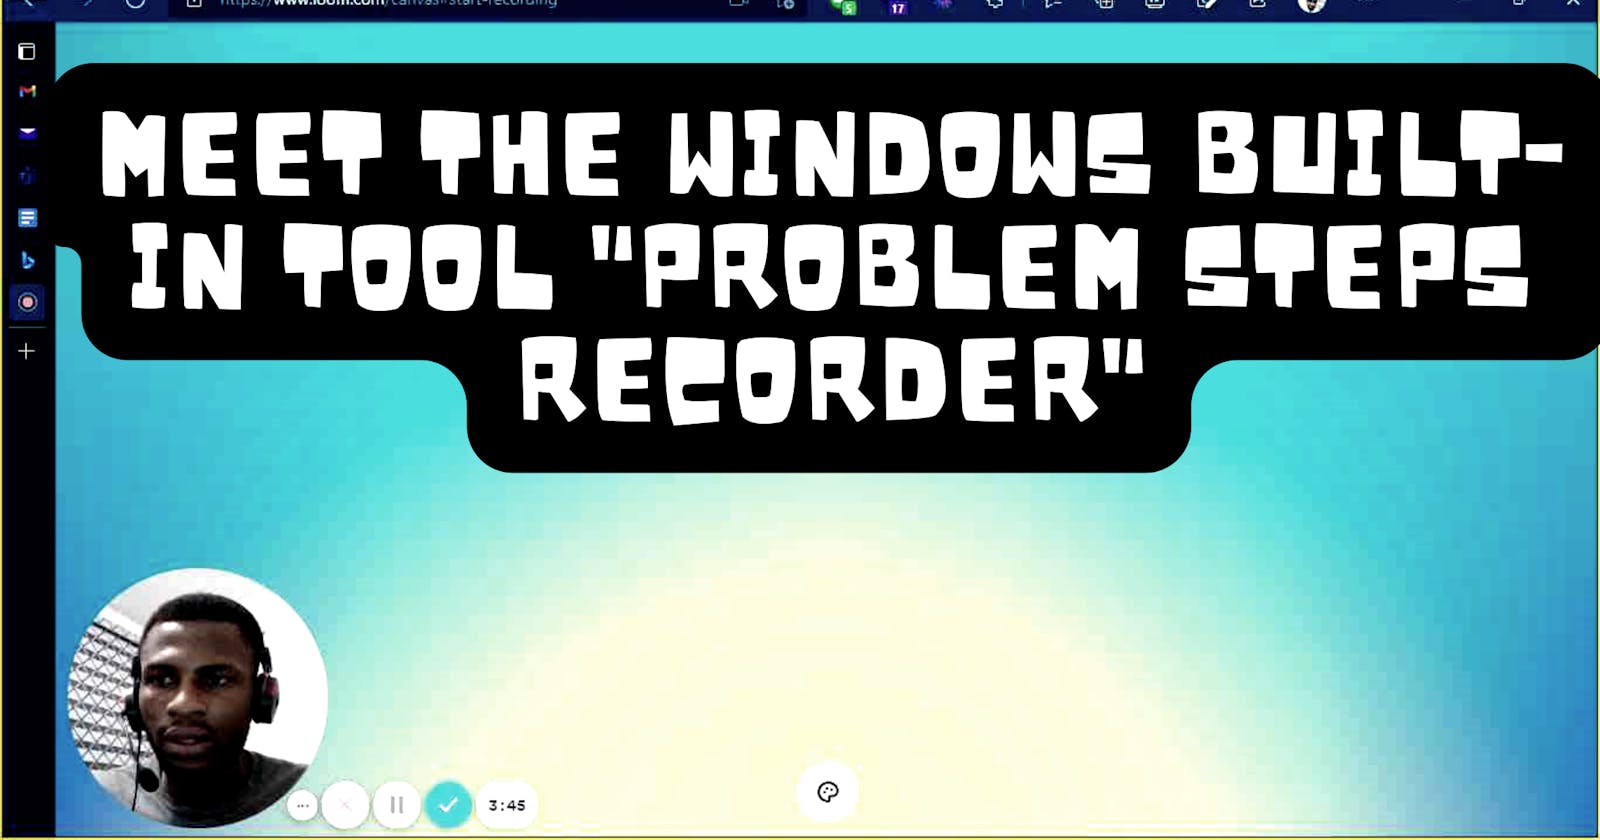 Meet the Windows Built-in tool "Problem Steps Recorder"